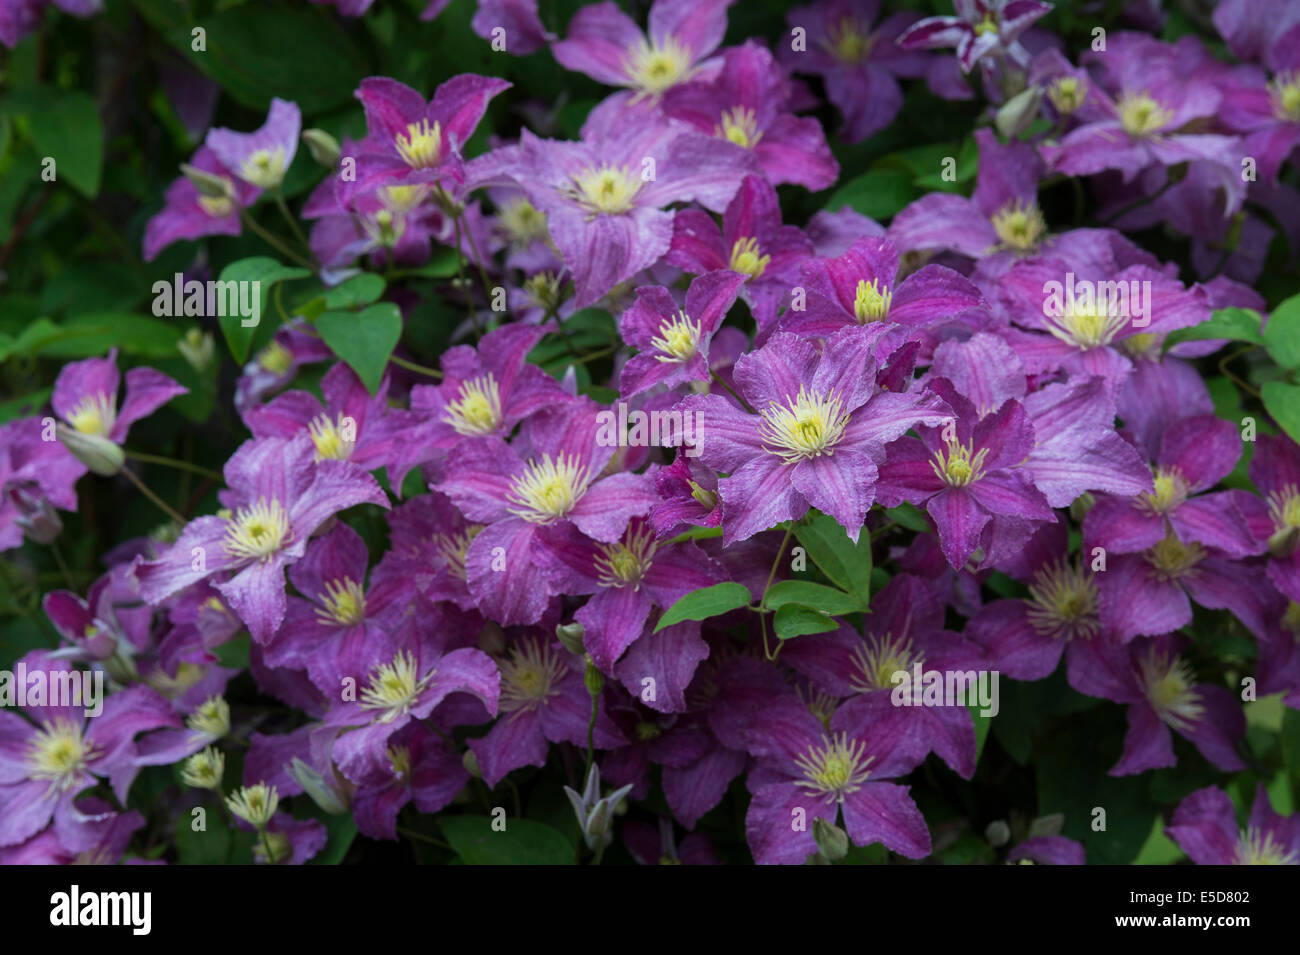 Clematis 'Jolly Good'/ Clematis 'Zogojo'. Late Large-flowered clematis flowers Stock Photo